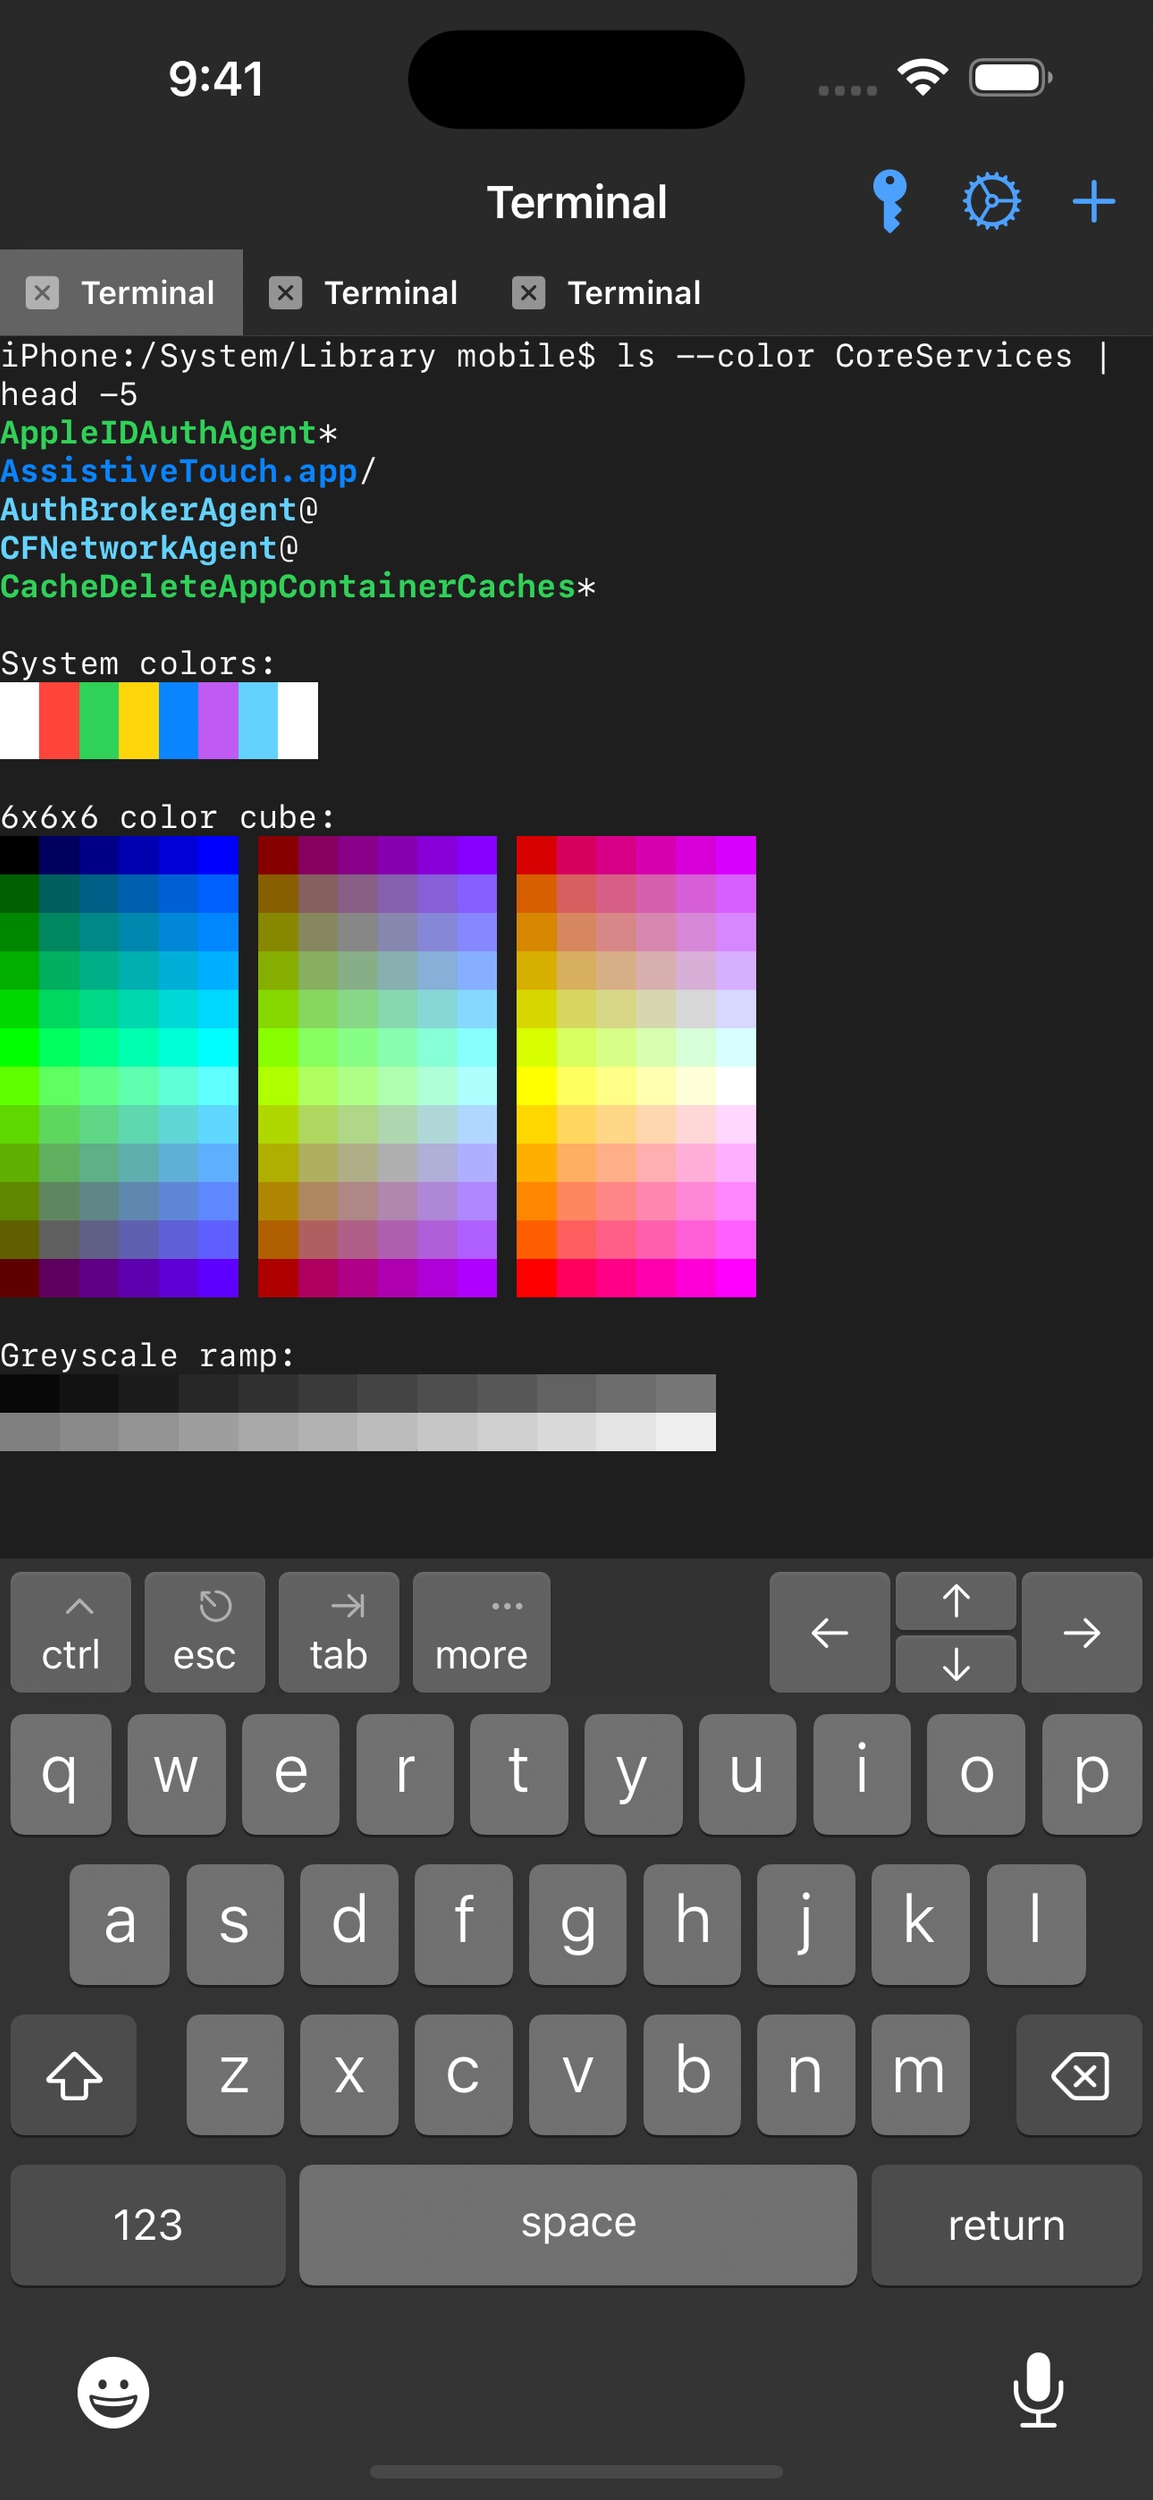 The main terminal screen of NewTerm 3, displaying a color test.